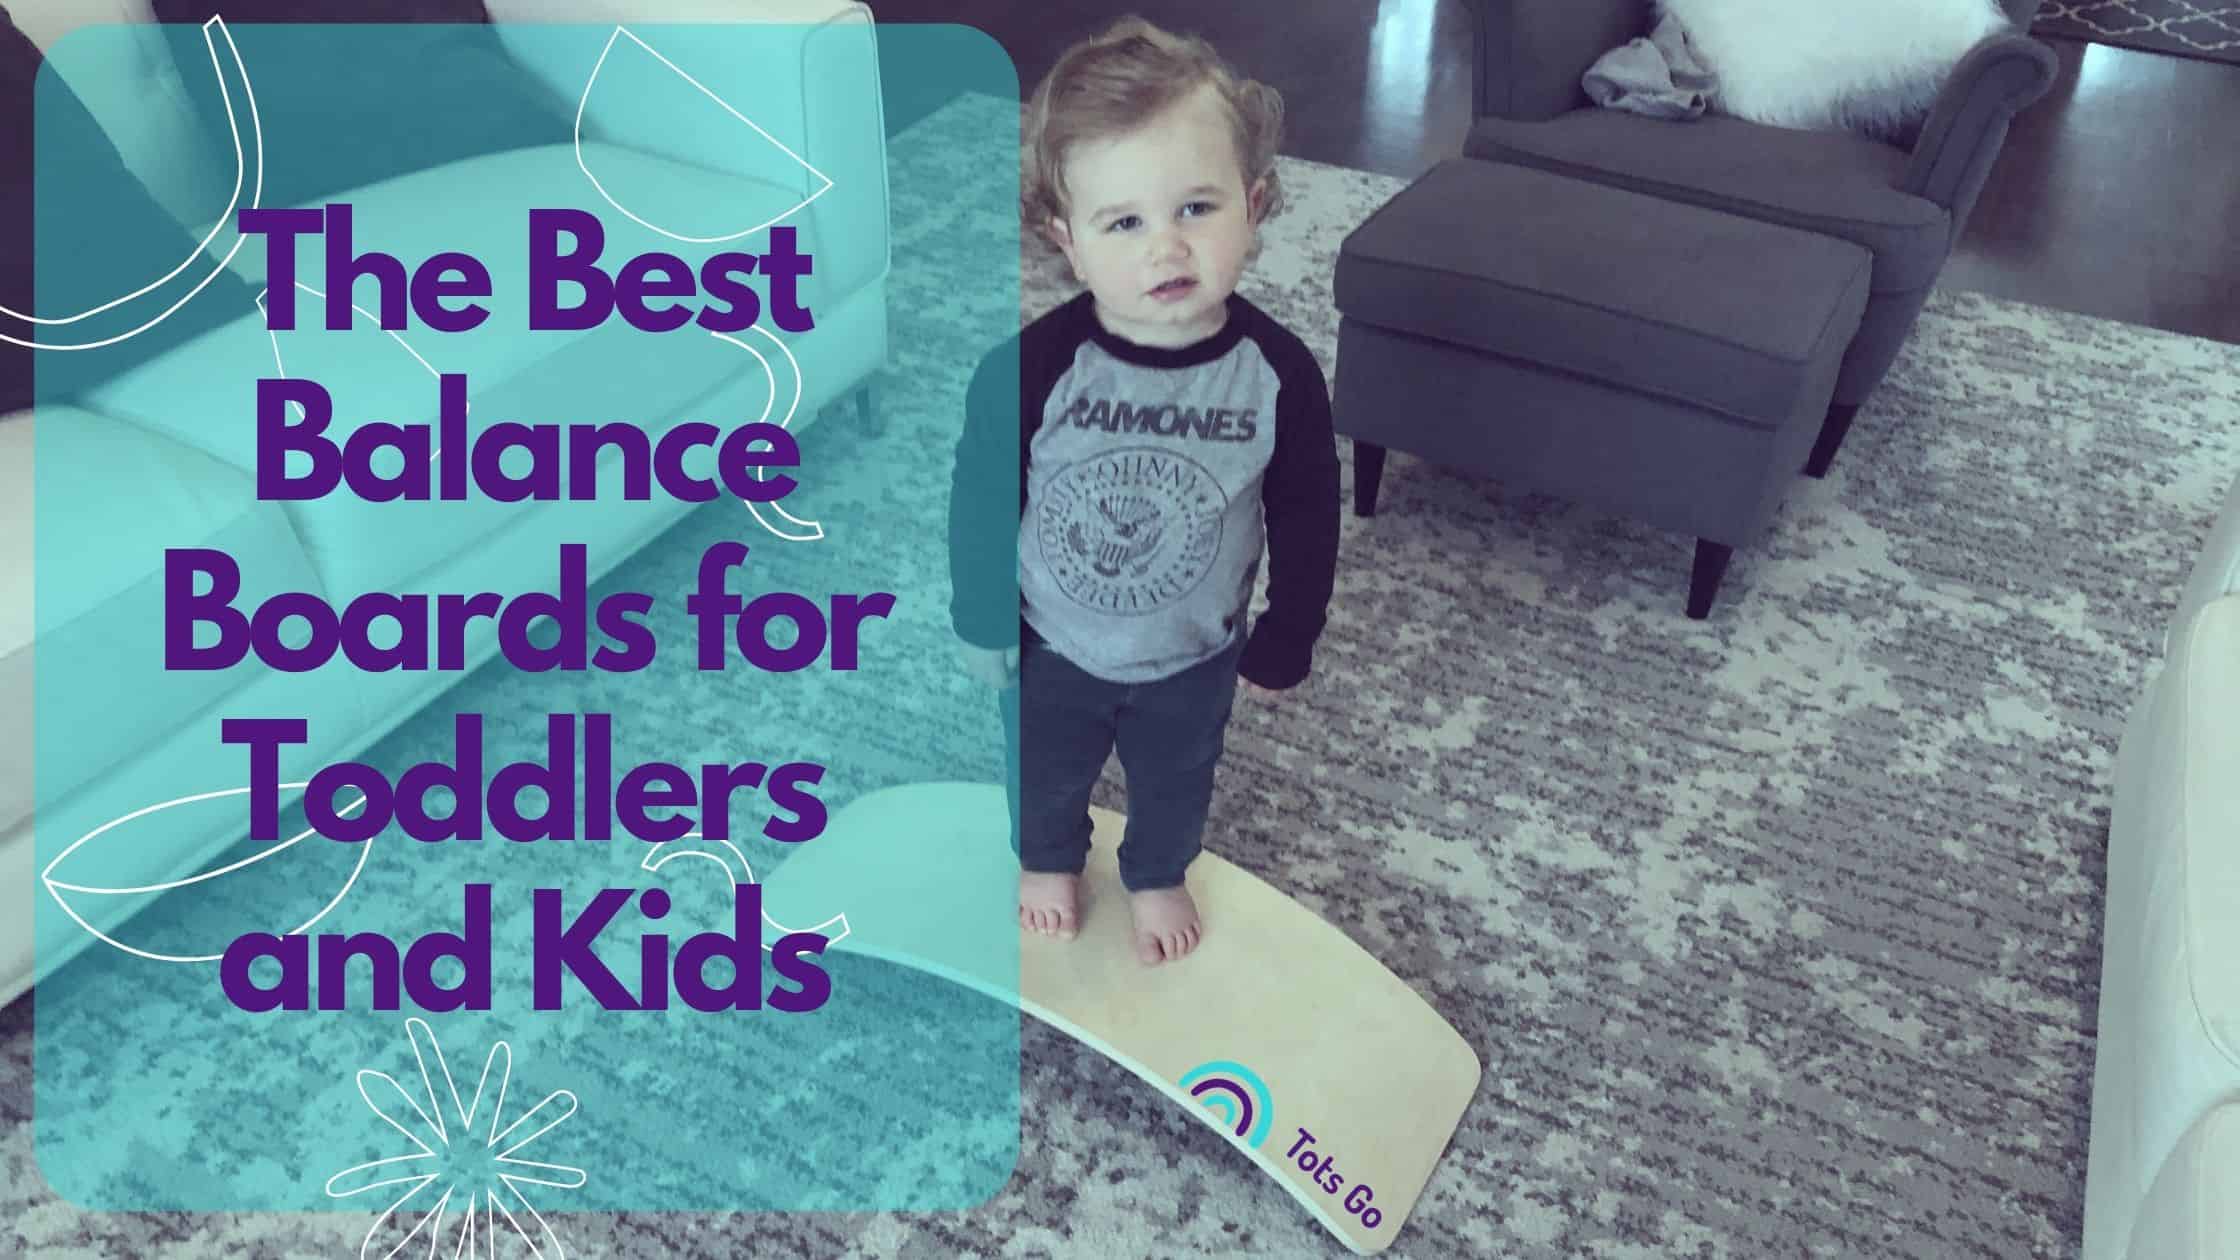 The Best Balance Boards for Toddlers and Kids